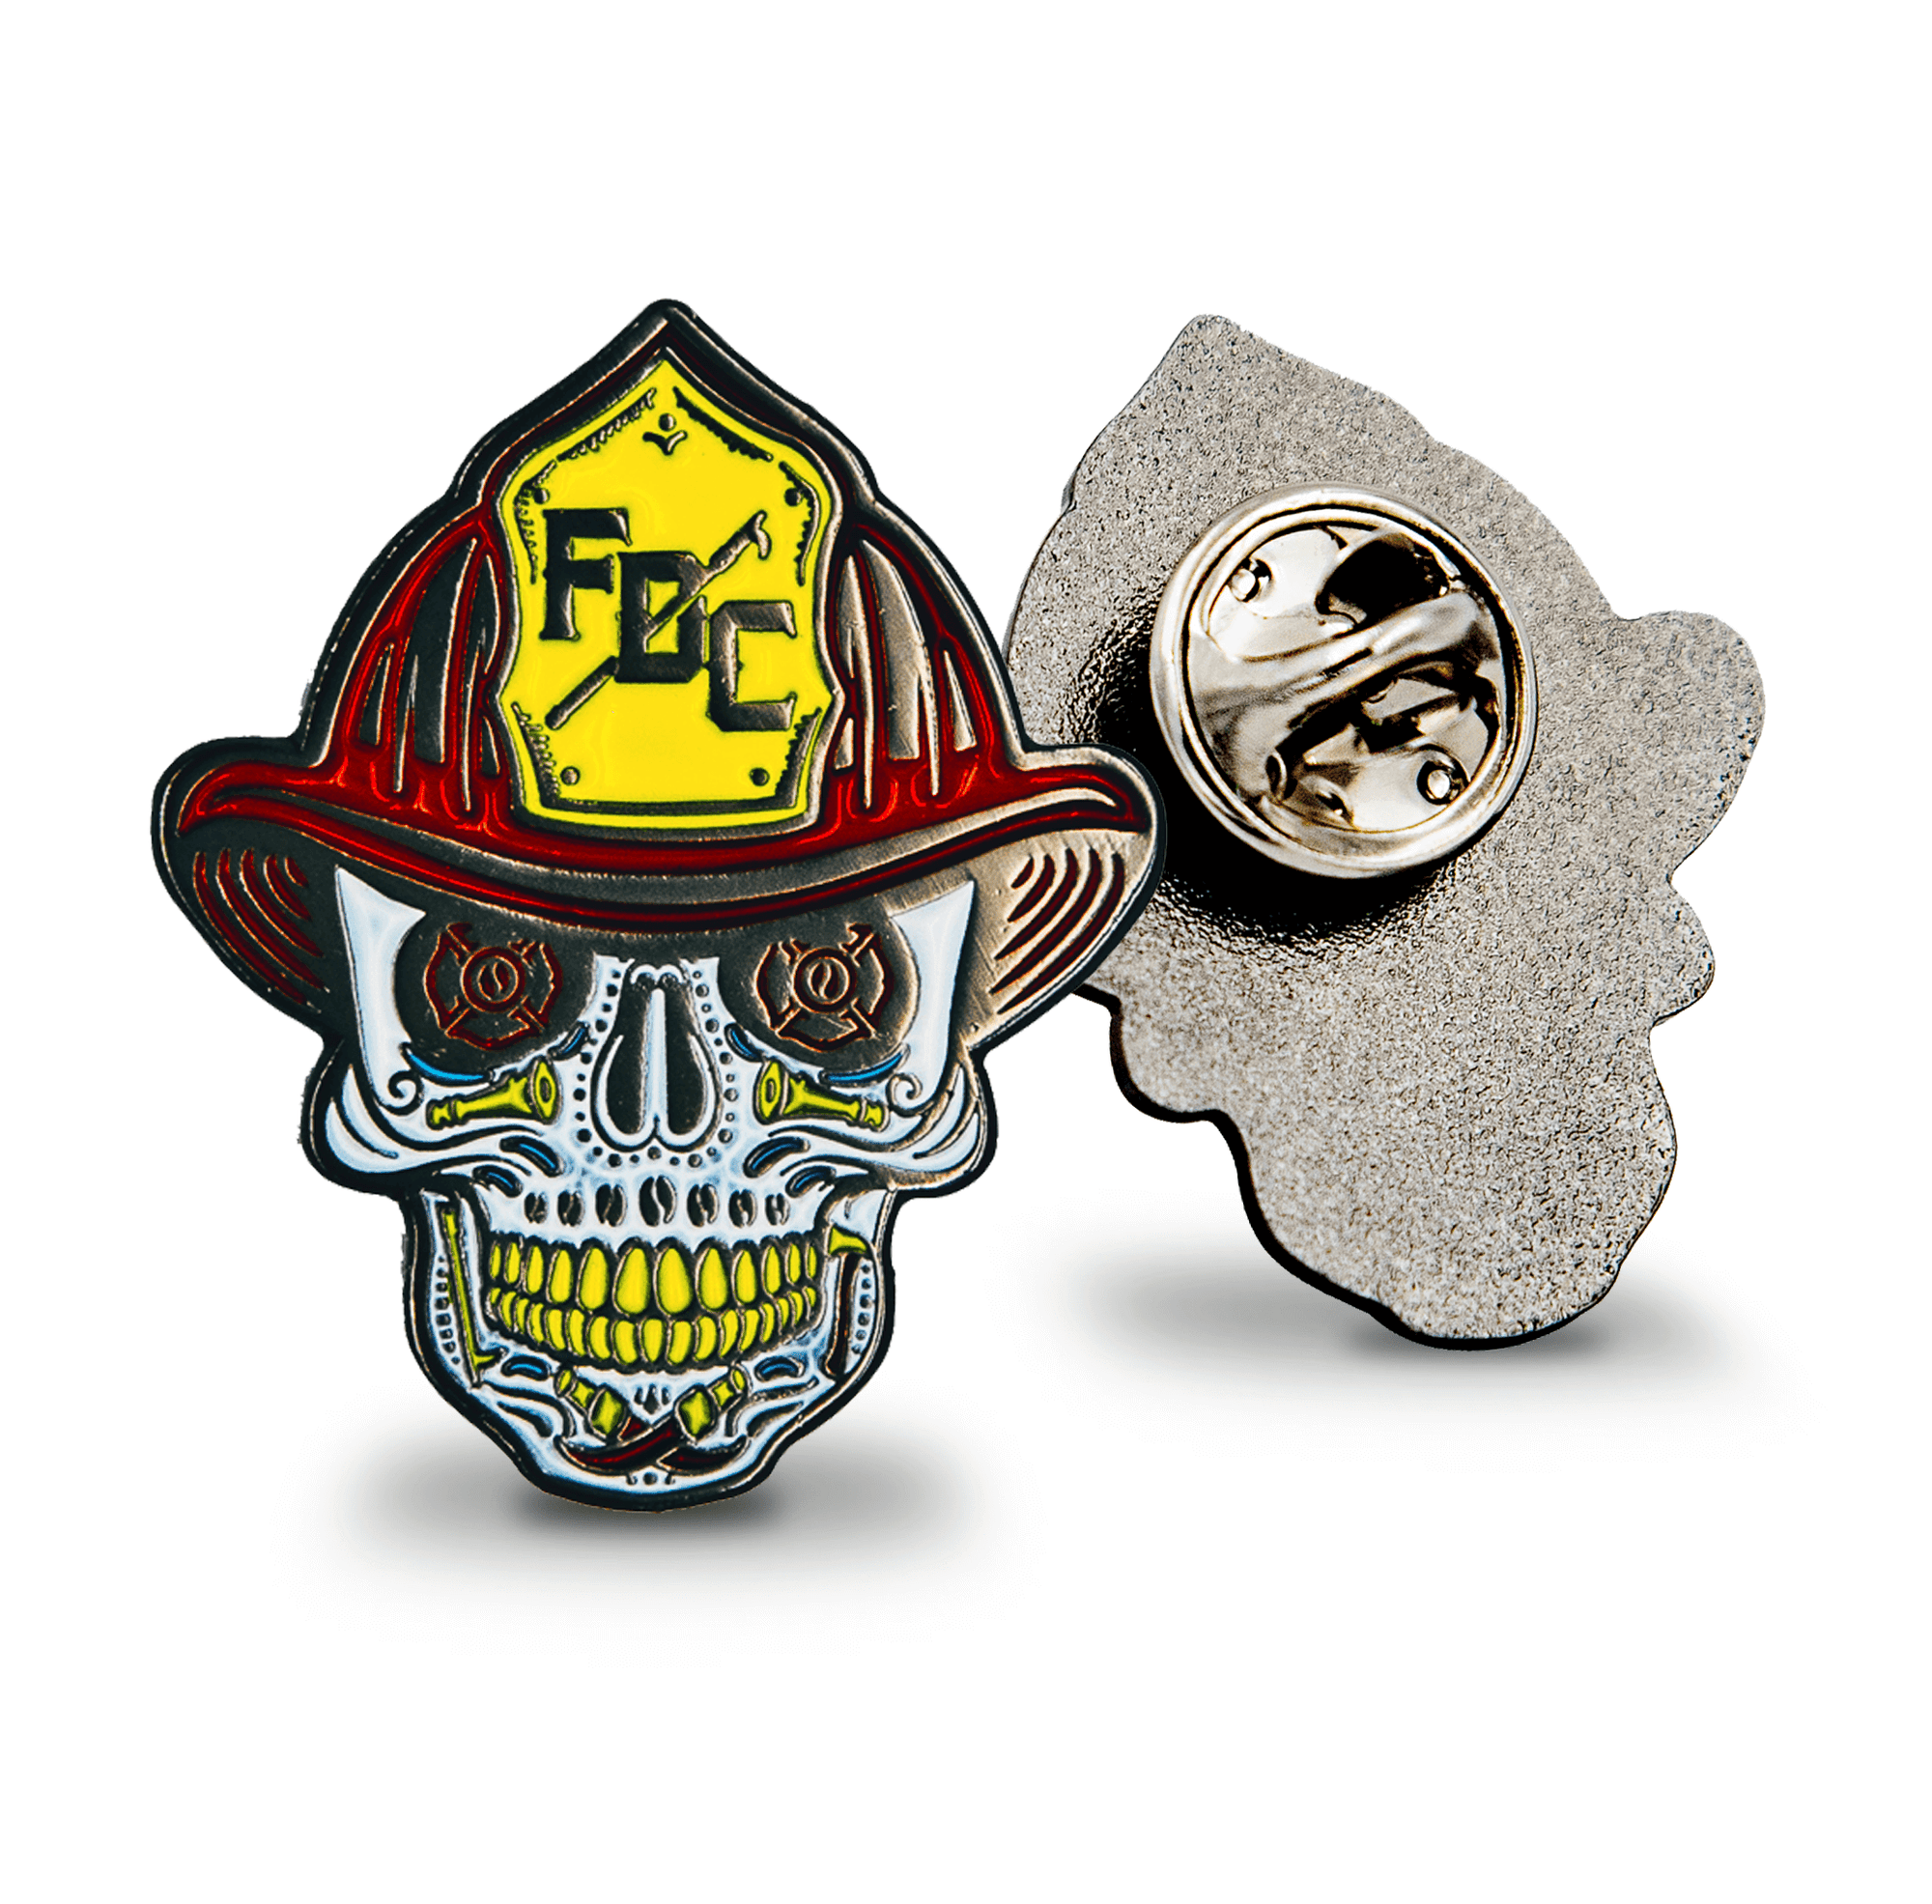 The dead Before Coffee pin, featuring a skull wearing a fireman's helmet.